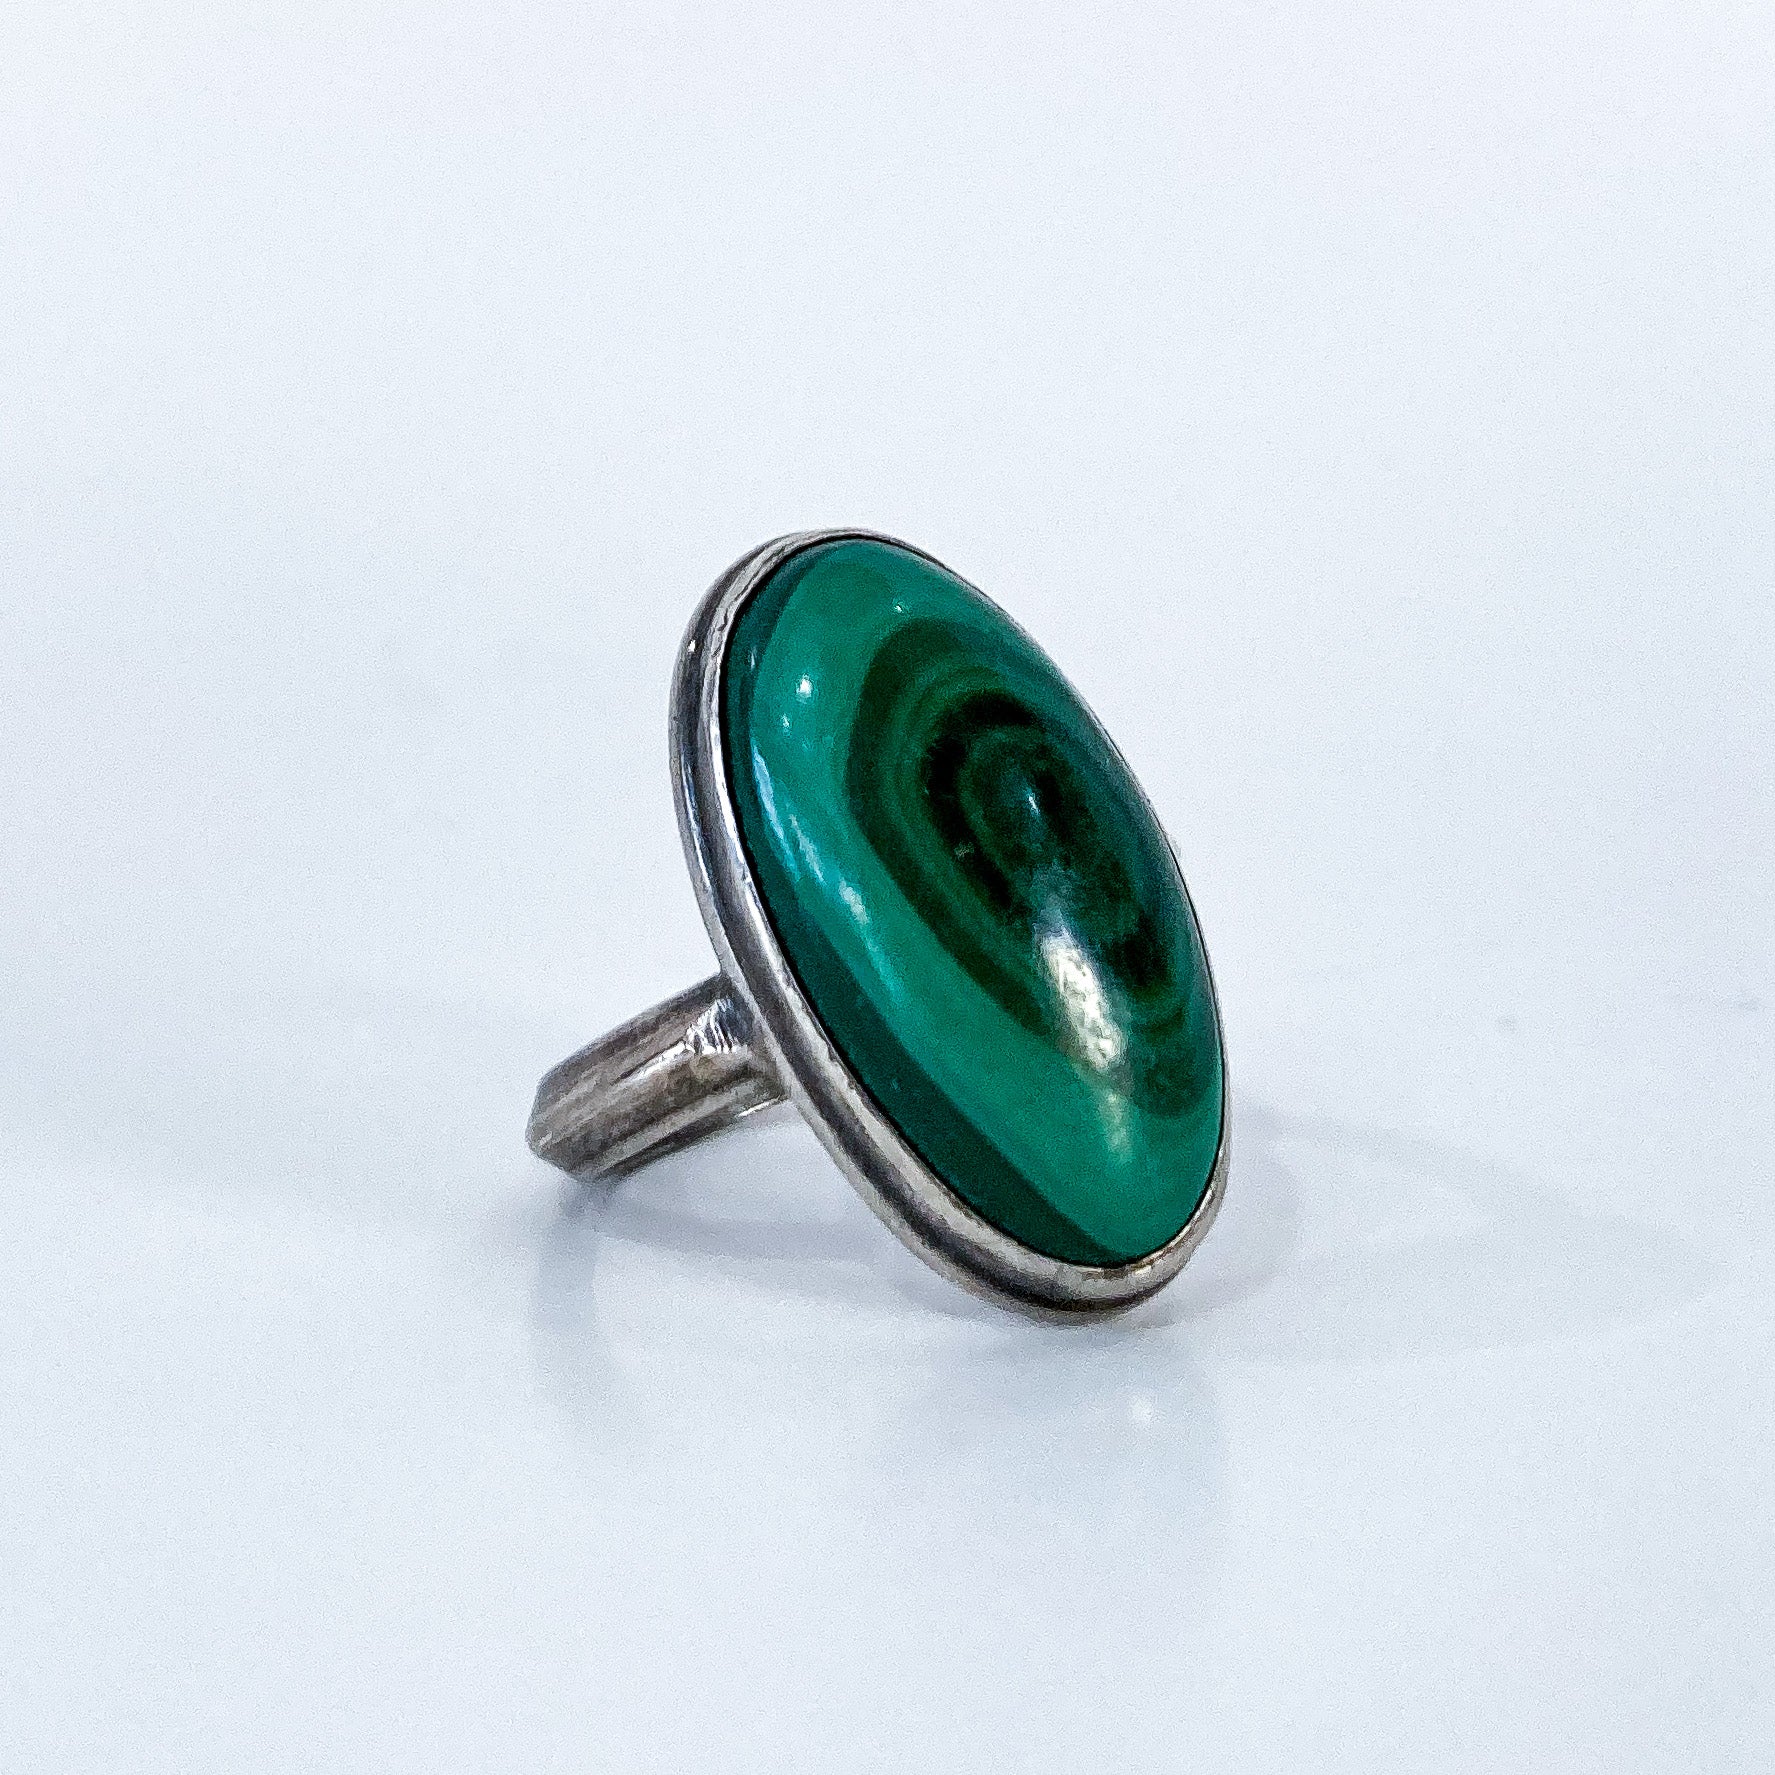 Vintage Domed Oval Swirling Rich Green Malachite Sterling Silver Ring Slightly Angled